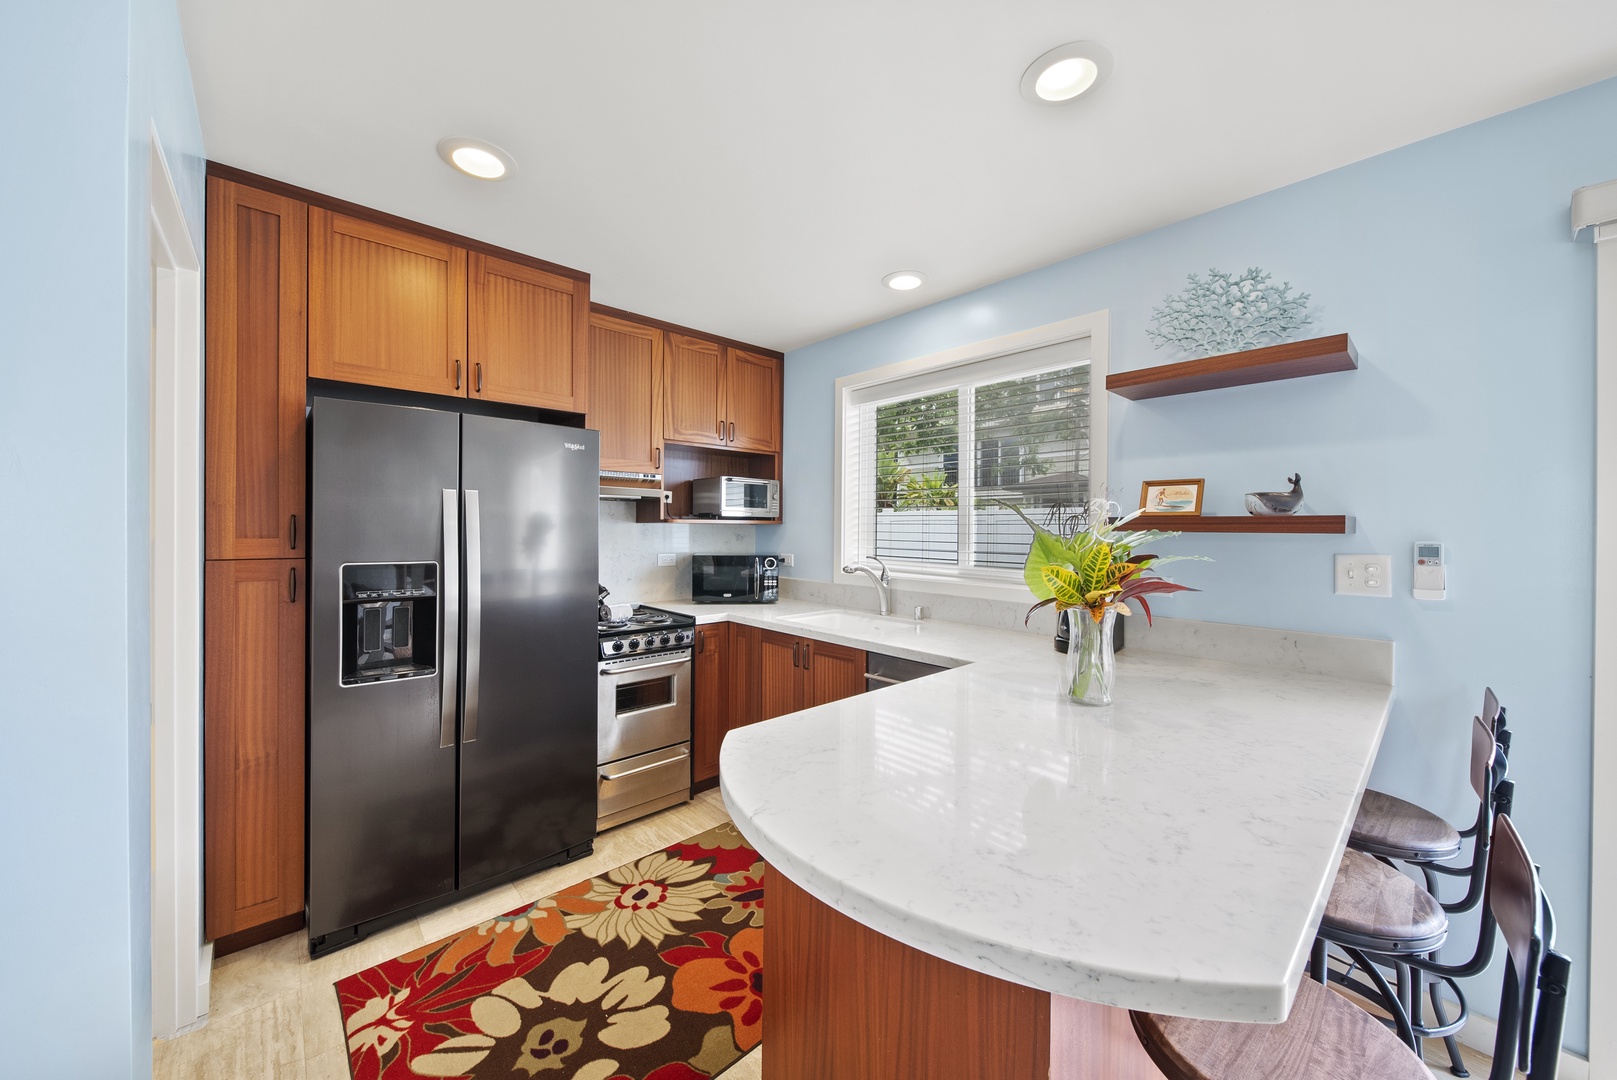 Waialua Vacation Rentals, Kala'iku Cottage - Inside the French doors you walk into a full kitchen with an apartment sized stove and refrigerator, custom cabinetry, and stone countertops